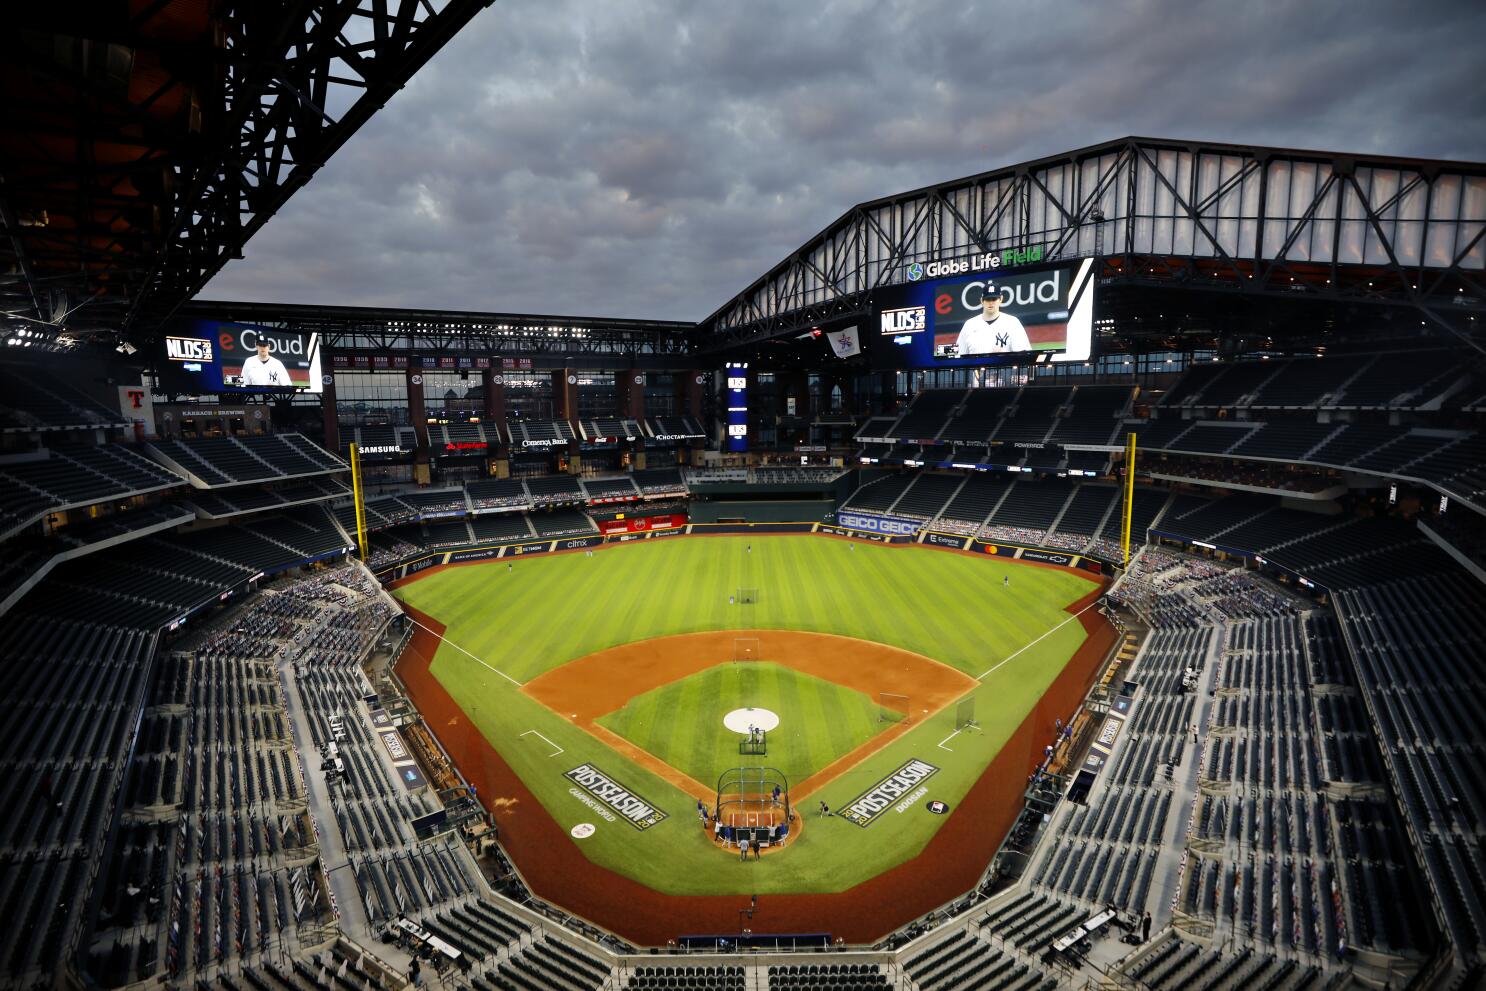 Braves, Dodgers Face Dilemma Going Into MLB Playoffs: Six Days Off